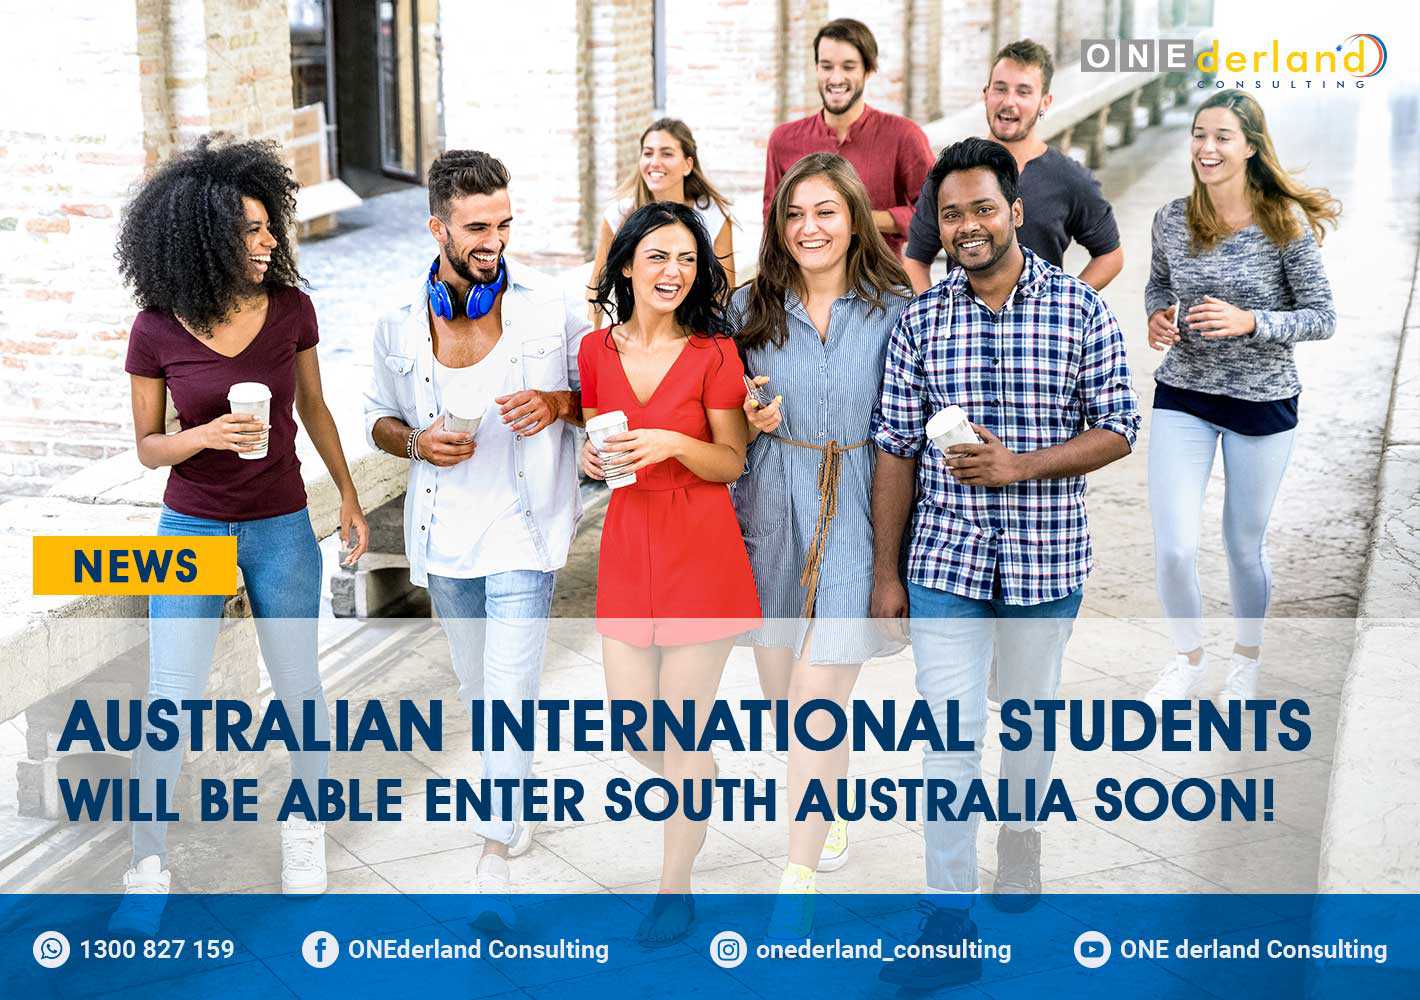 Breaking News! International Students can Return to South Australia in a Short Time!